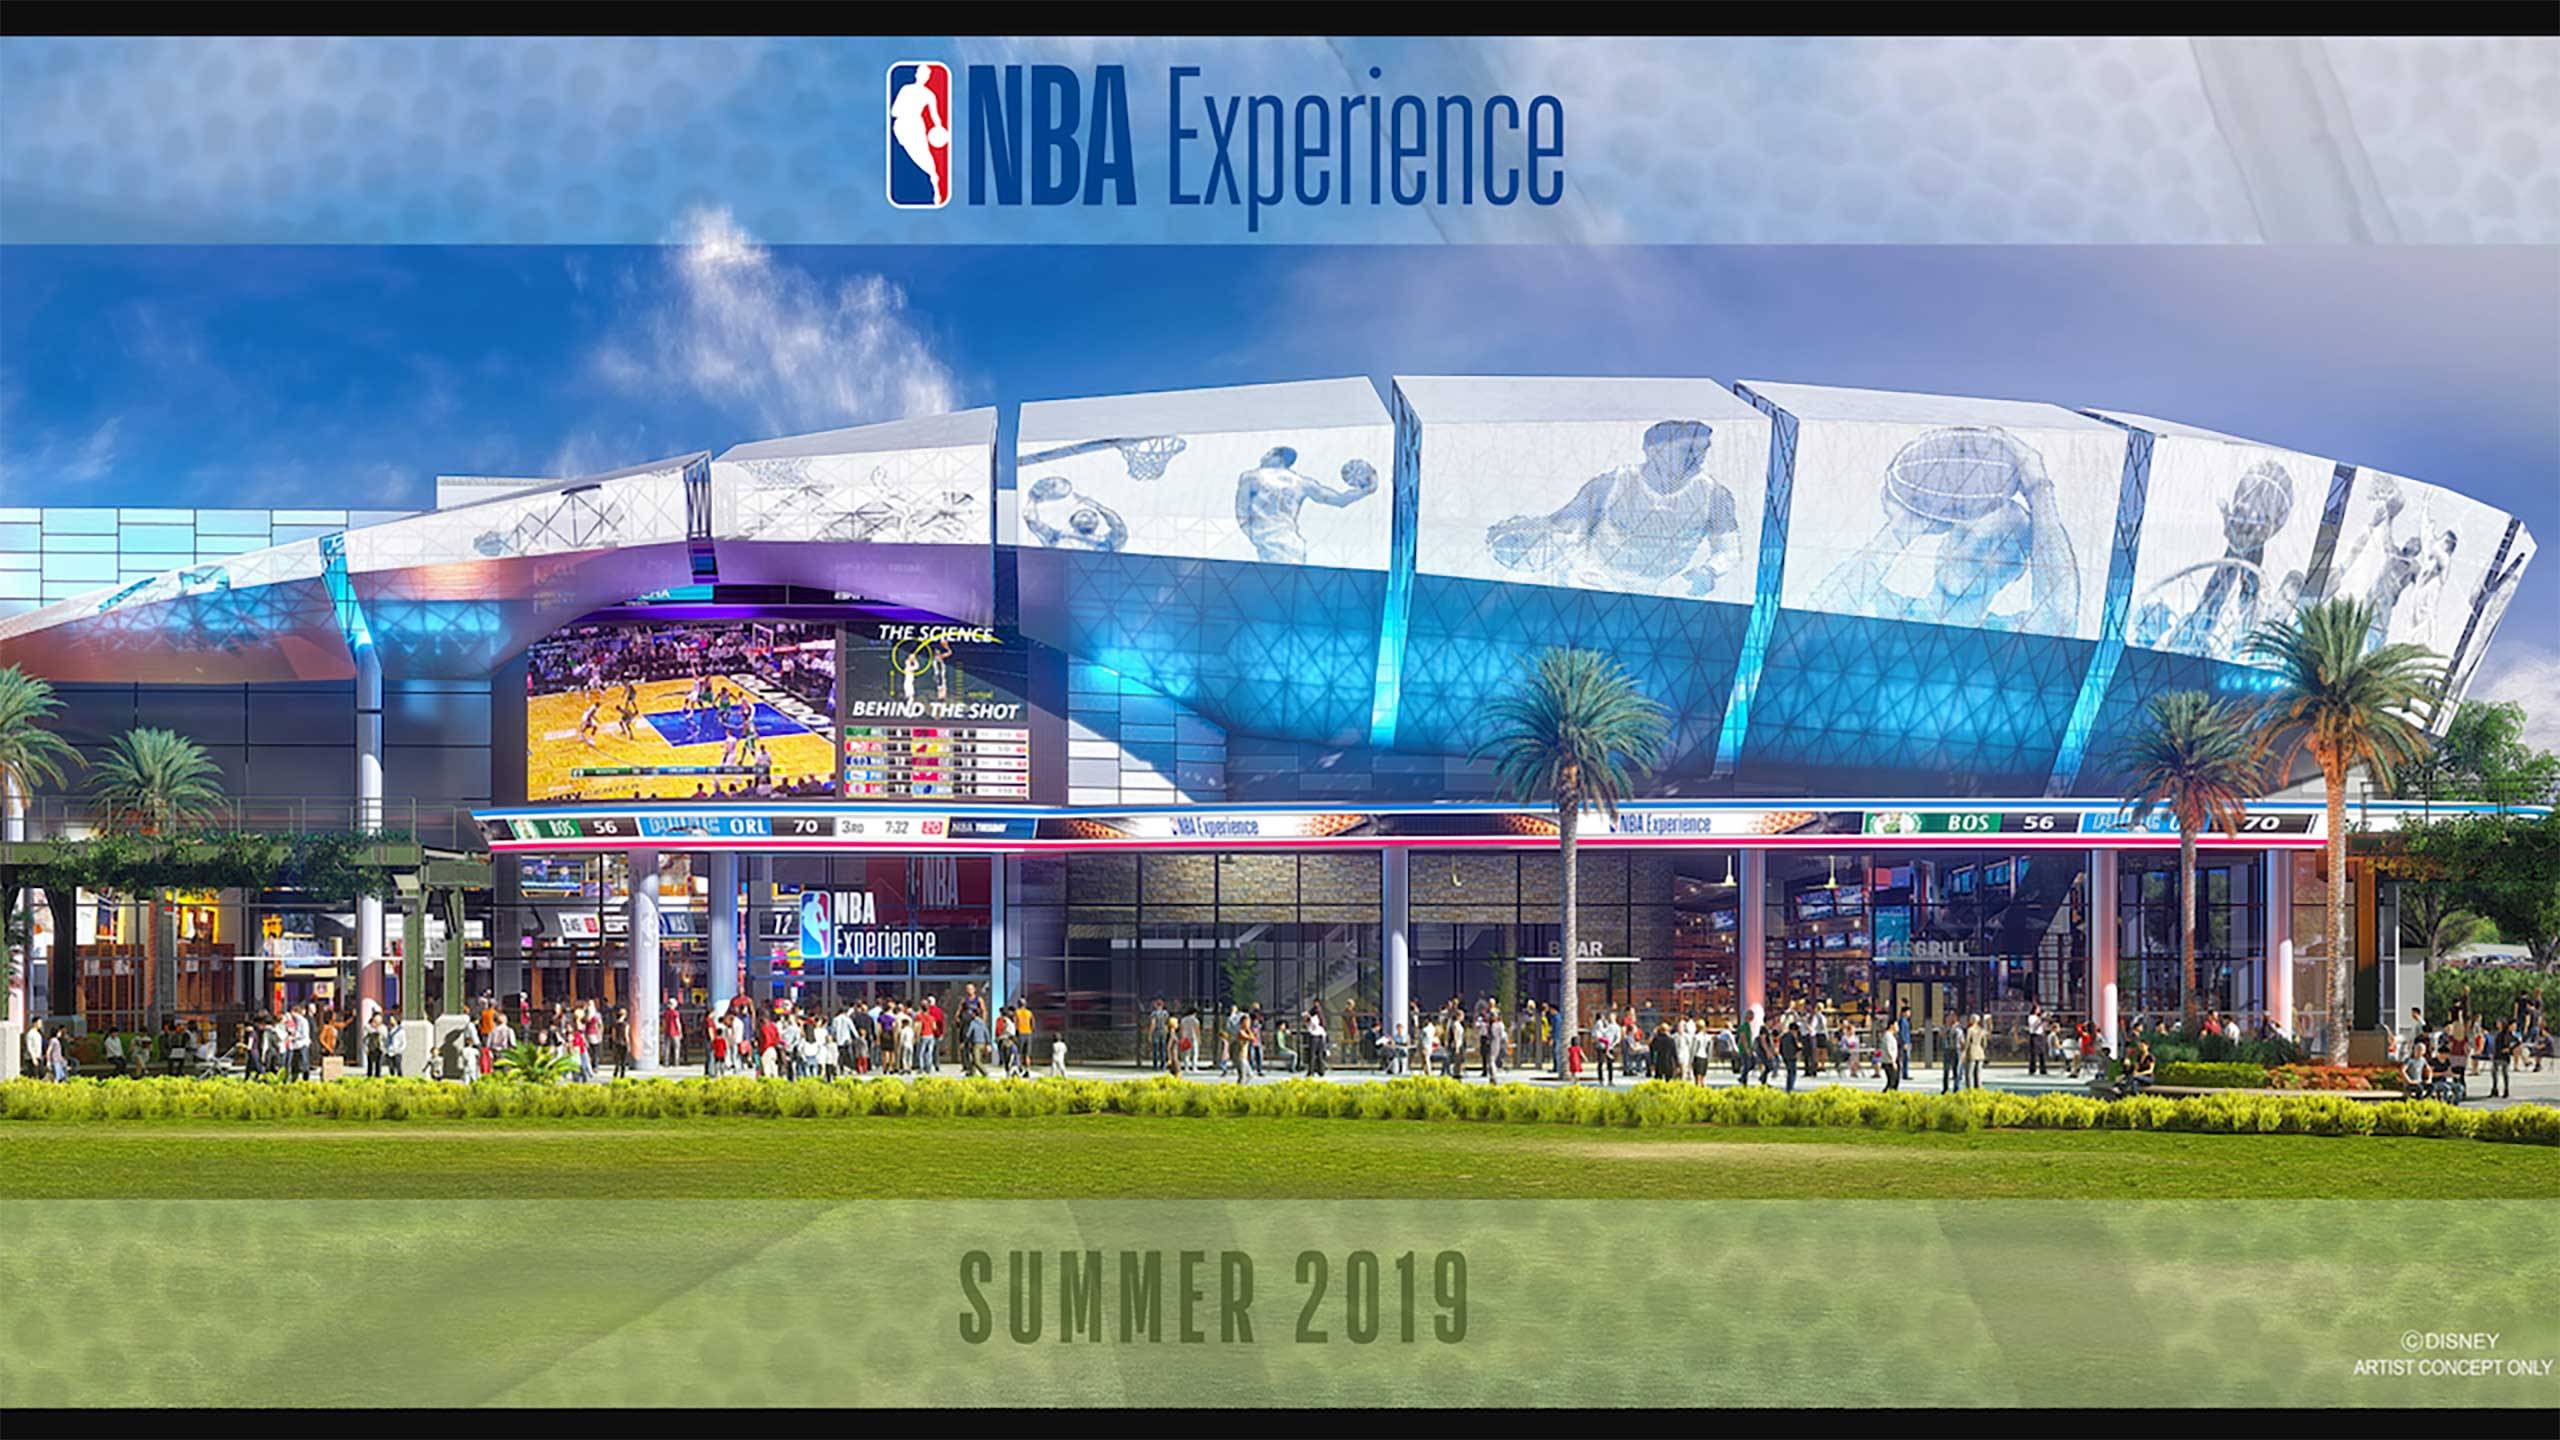 New concept art and details of activities coming to the NBA Experience at Disney Springs